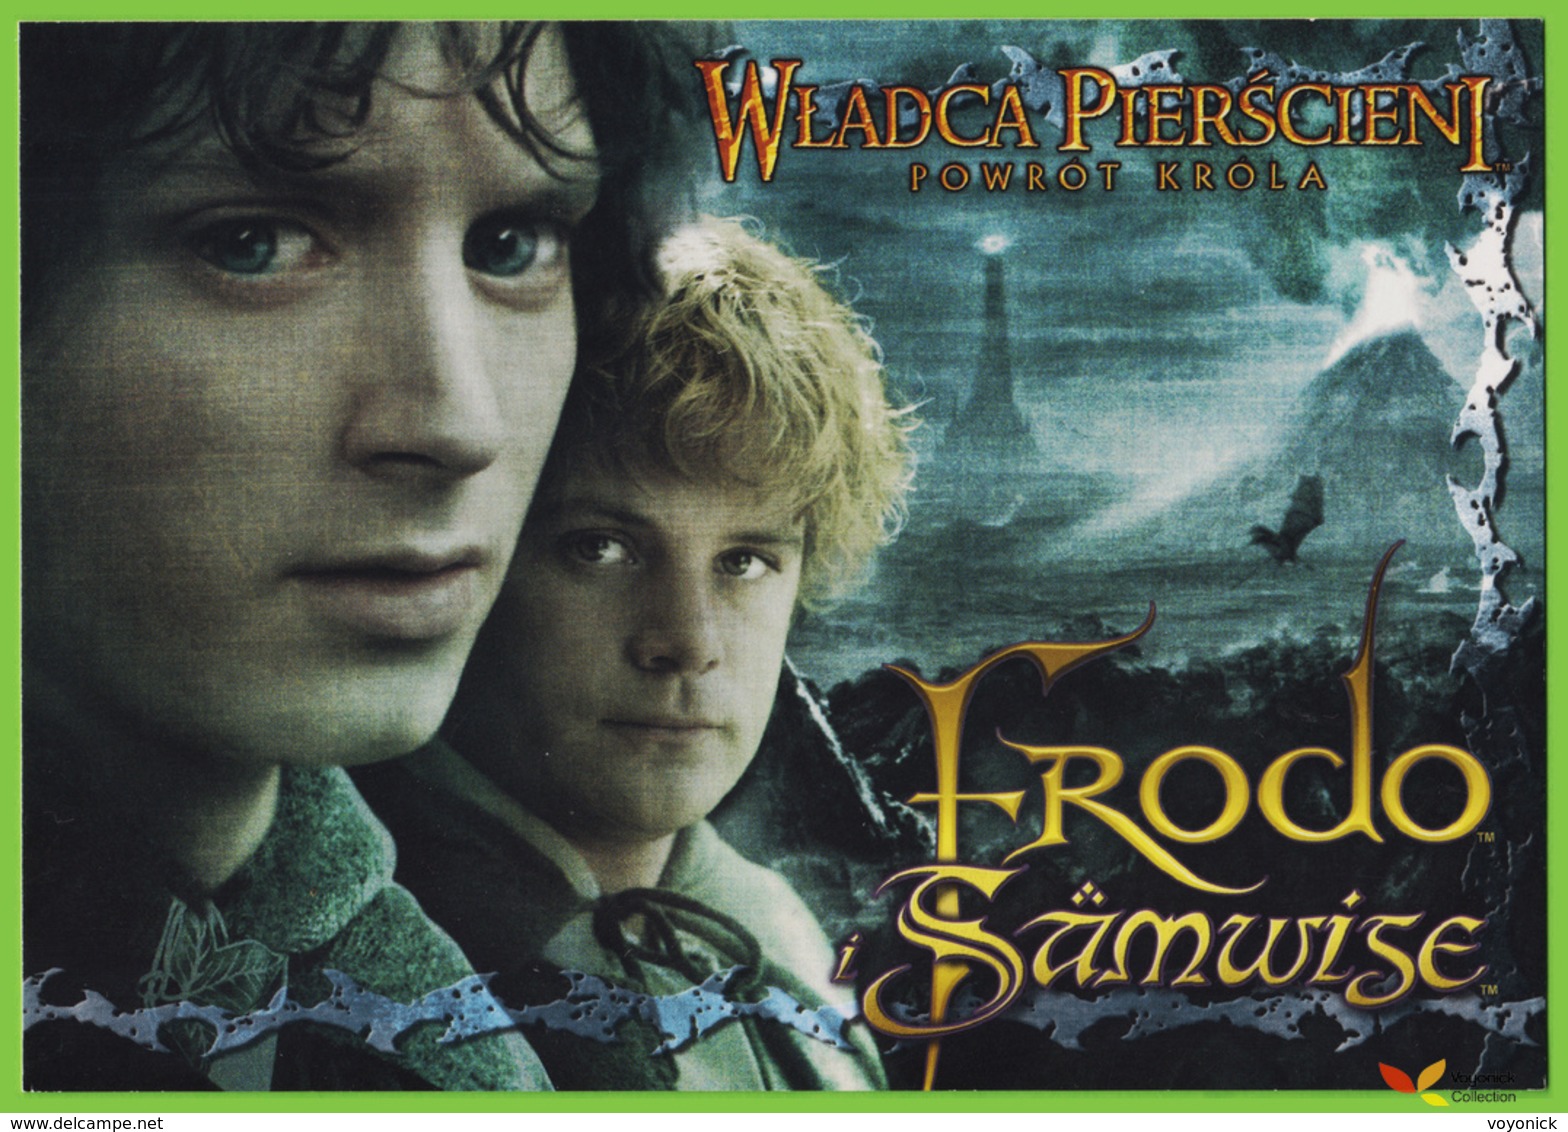 Voyo POLAND The LORD Of The RING - Return Of King FRODO & SAMWISE  MINT LOTR 075 Elijah Wood & Sean Astin - Posters Op Kaarten